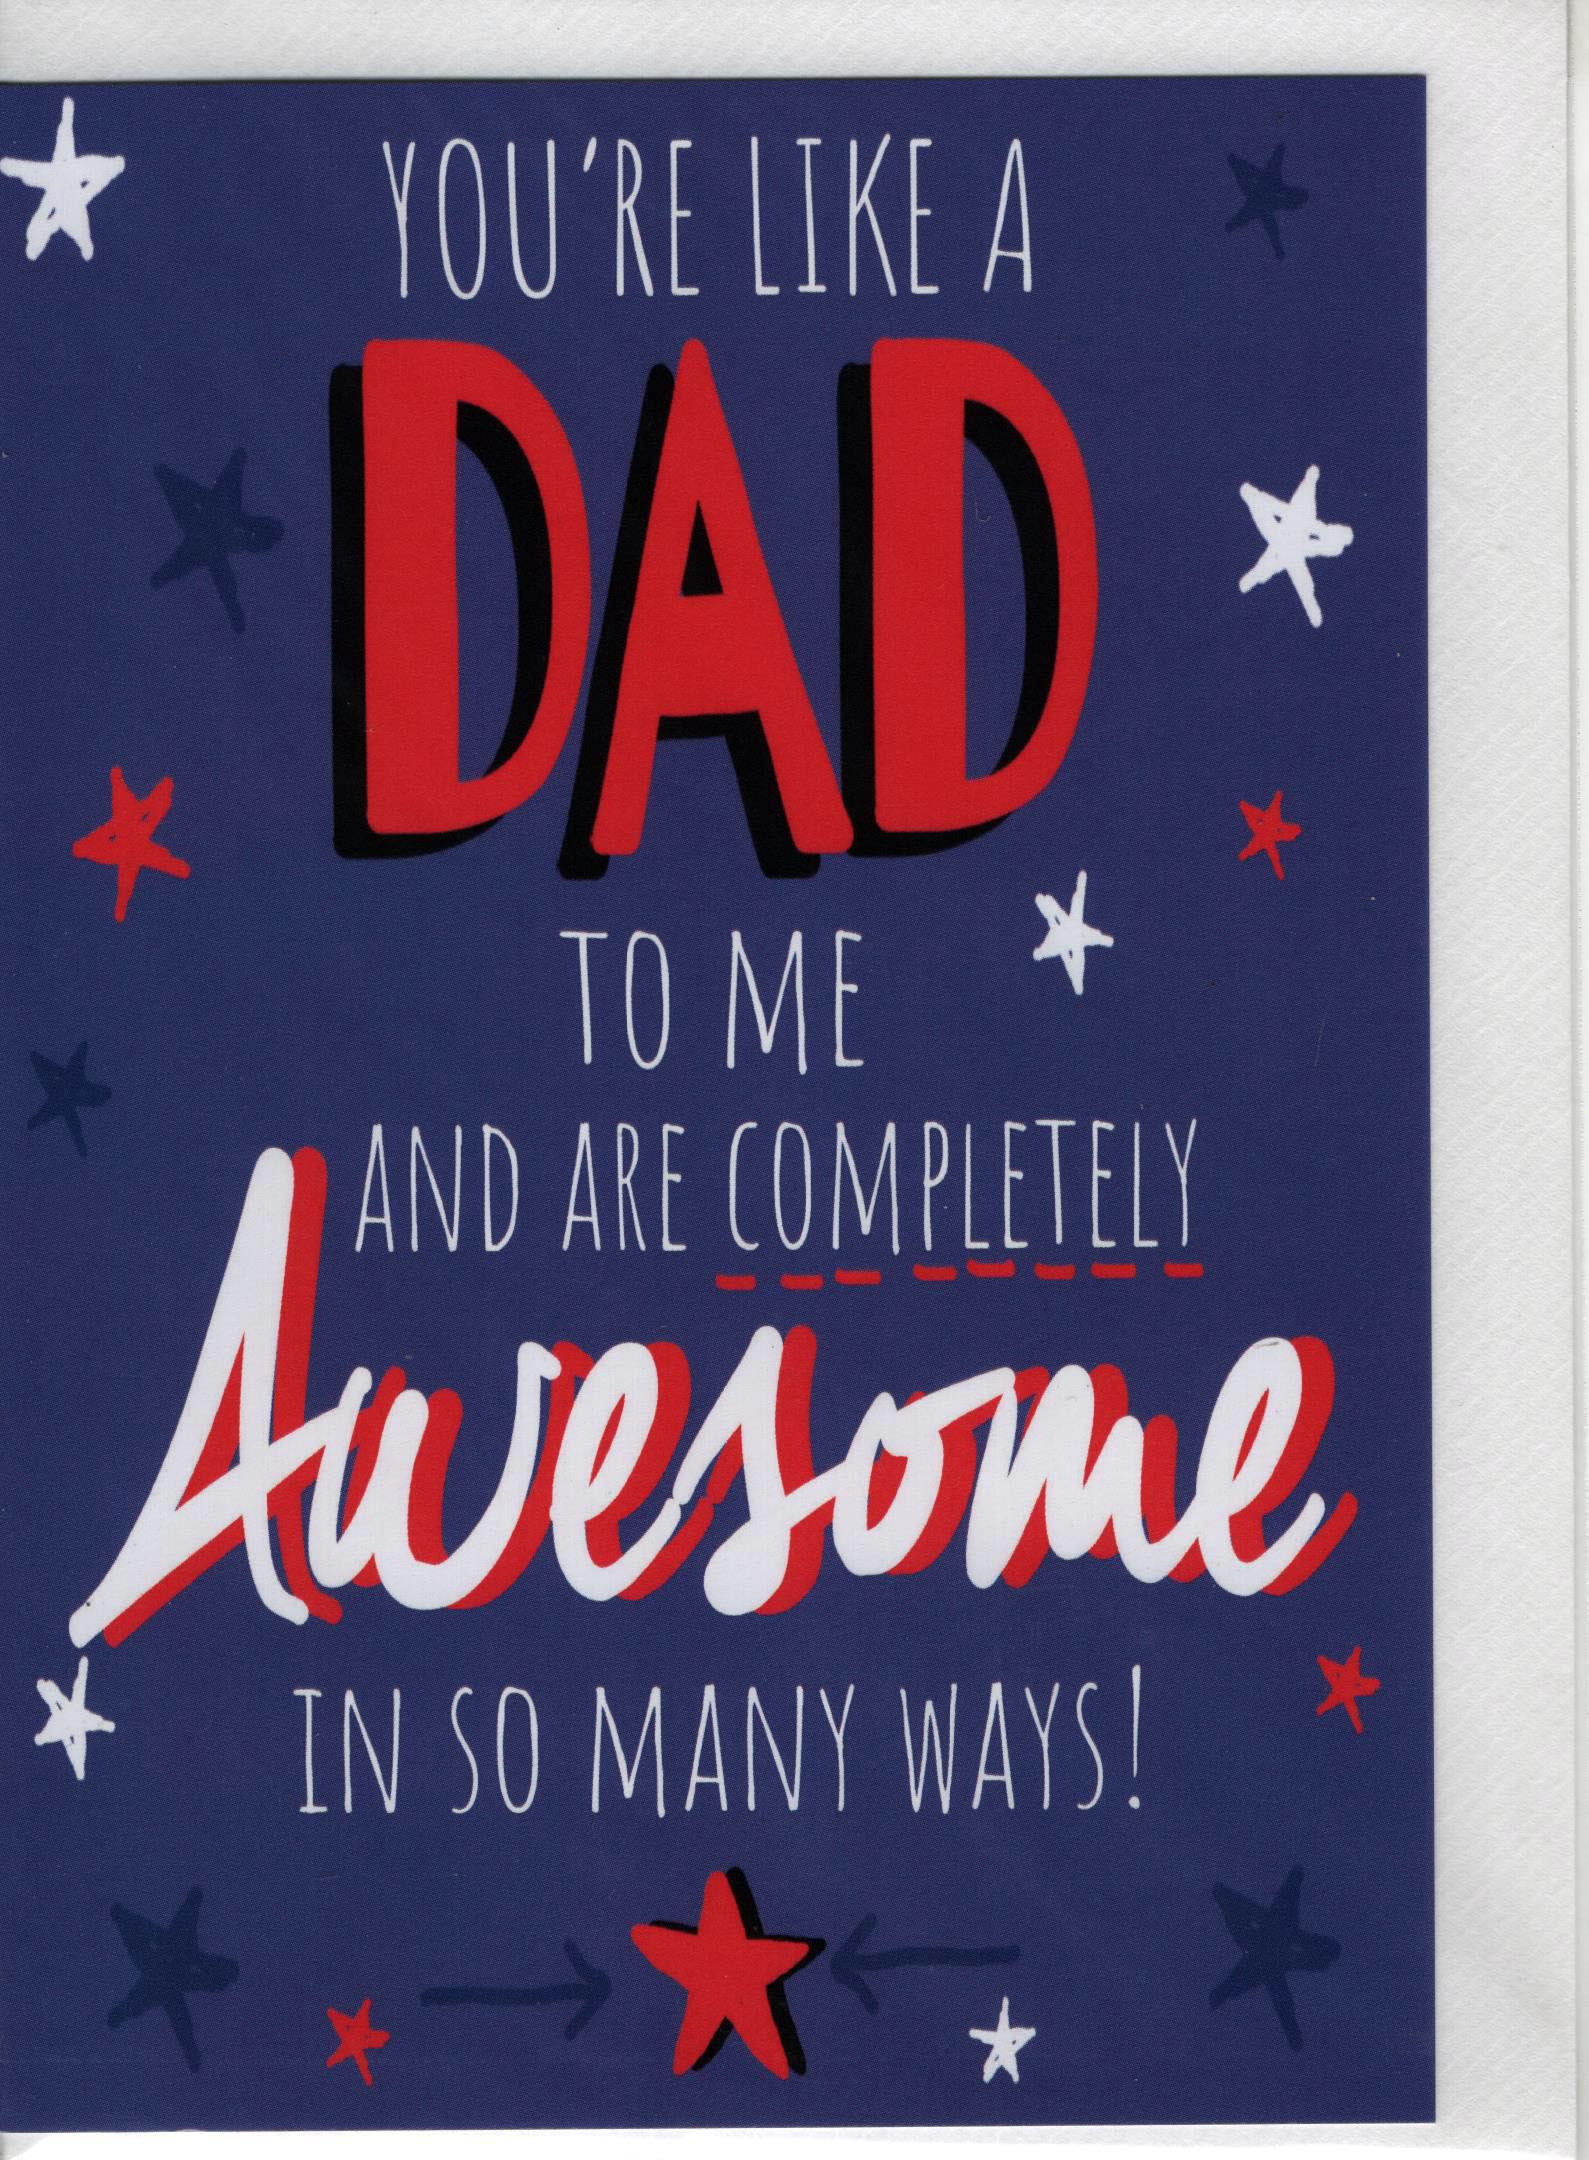 You're Like a Dad to me and are Completely awesome in so many ways!